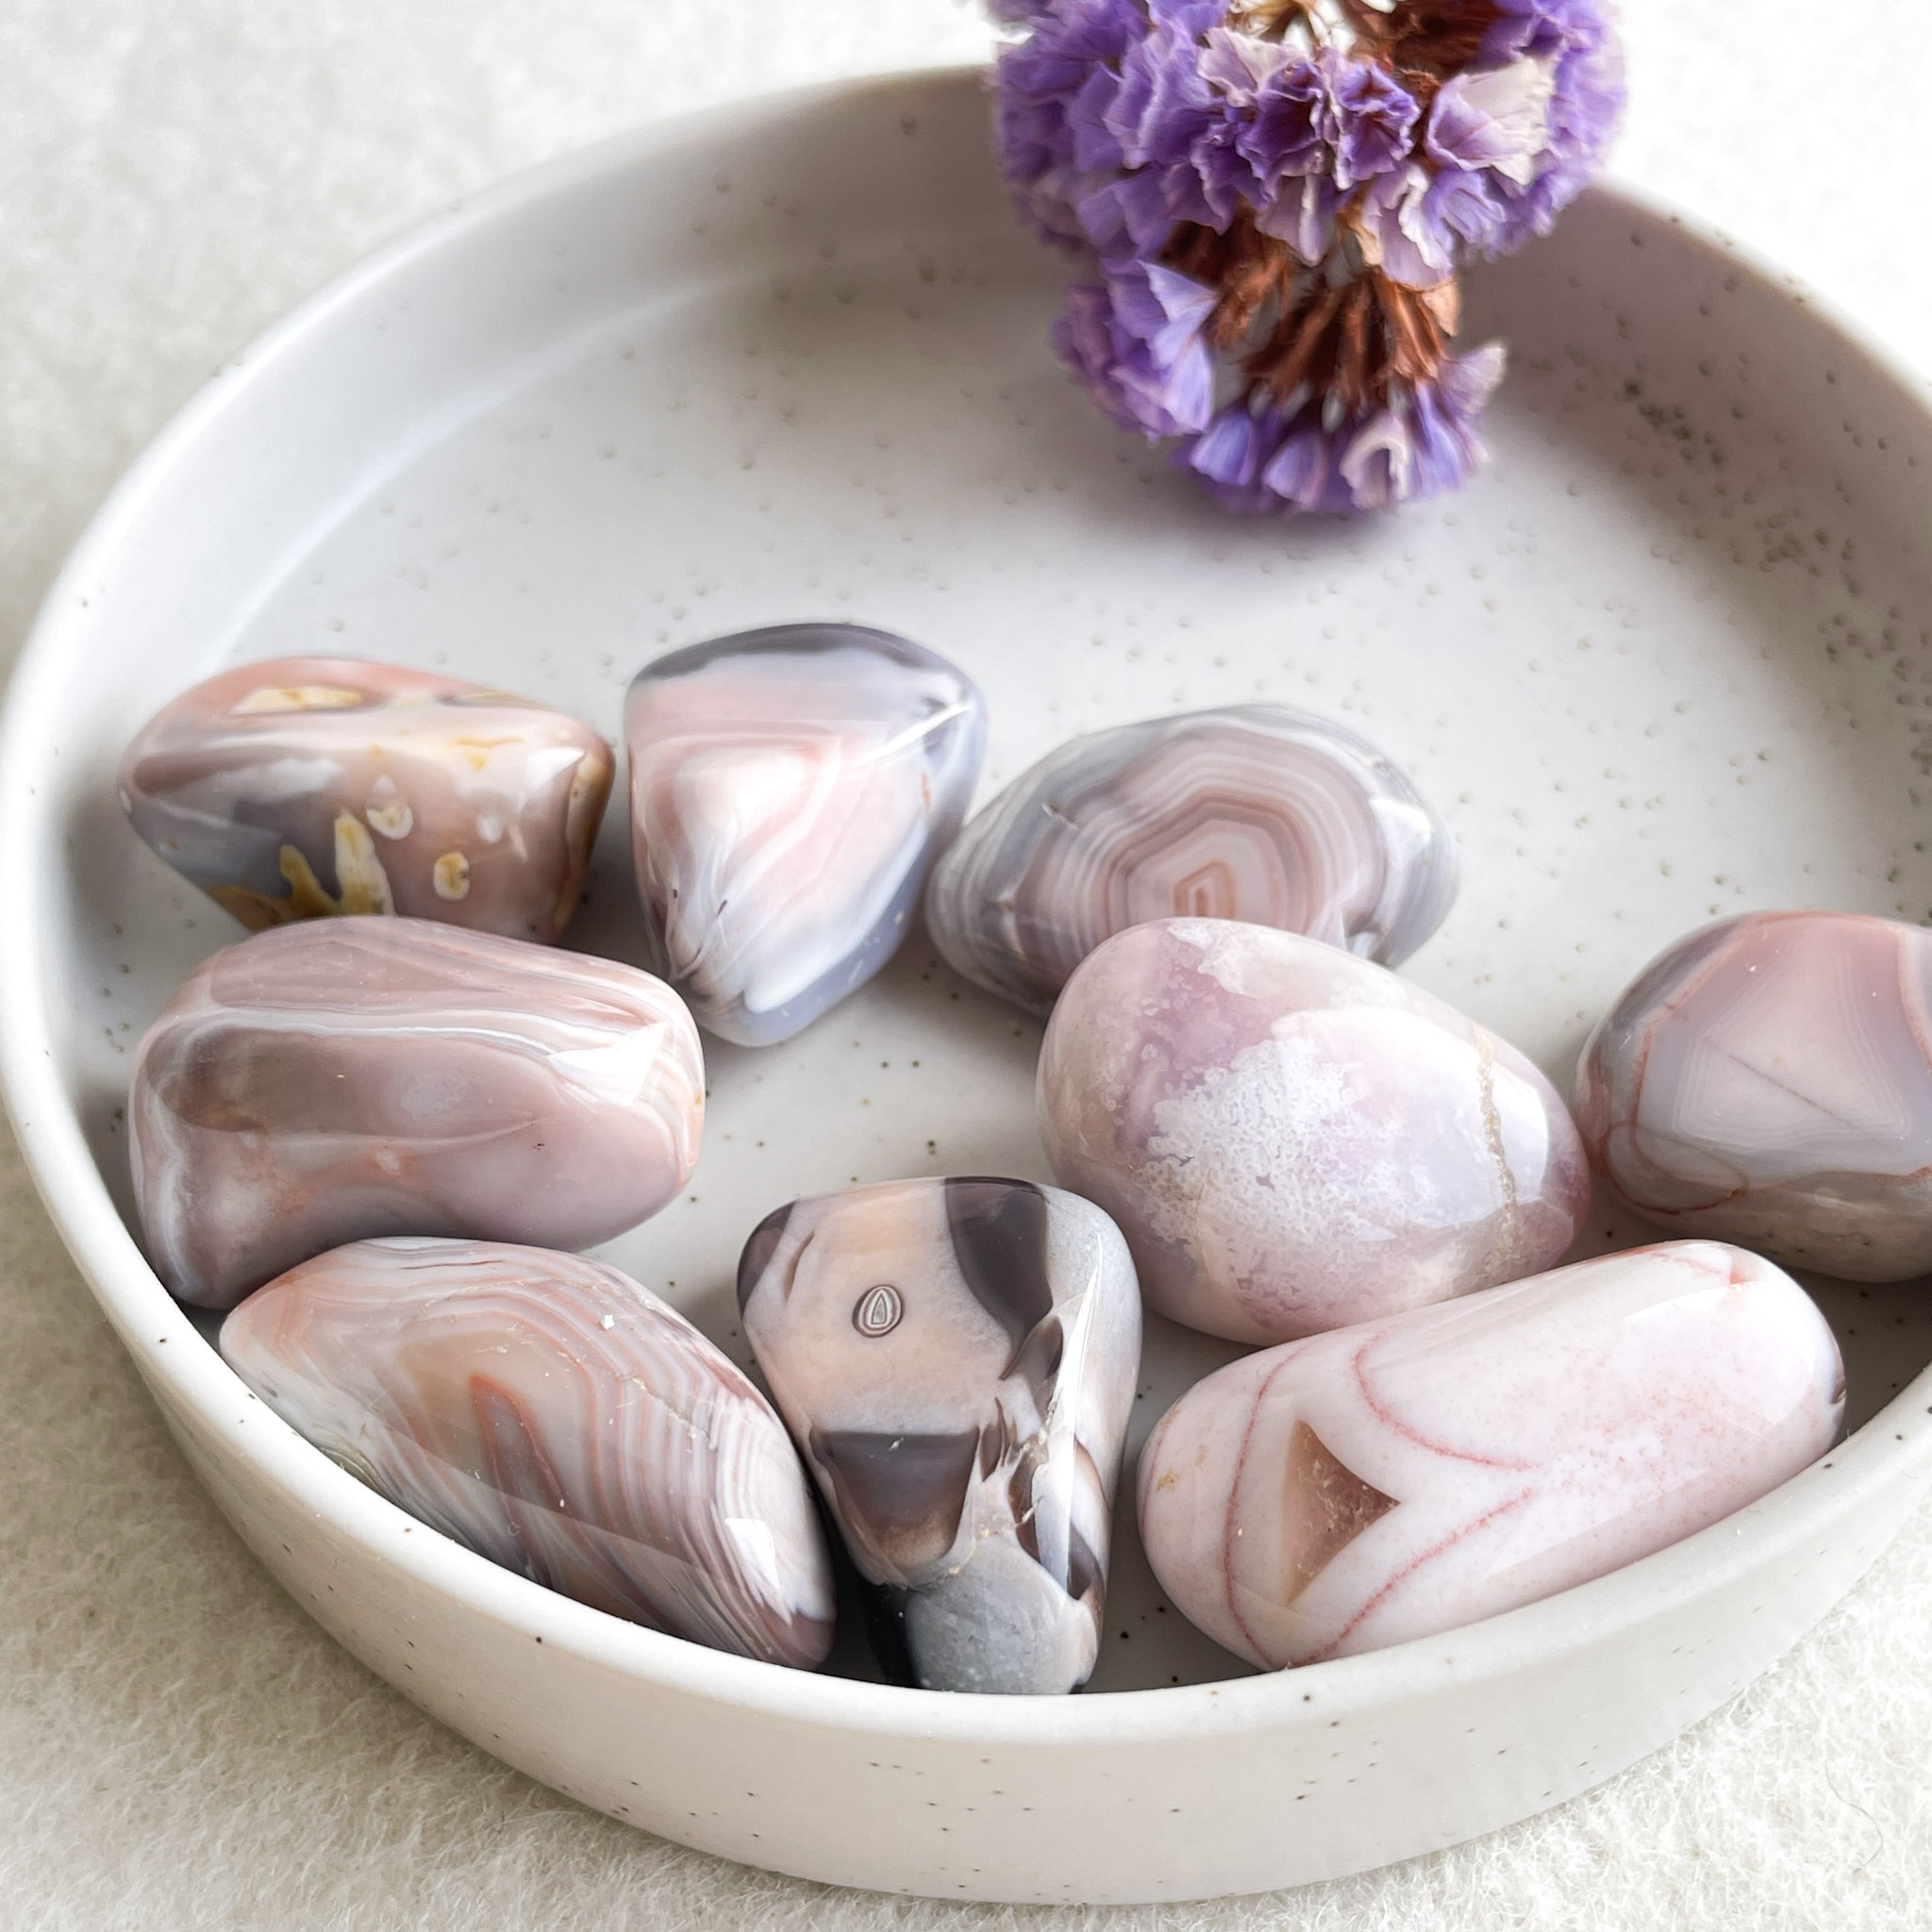 Polished agate stones in varying shades of pink and gray arranged in a white bowl beside a dried purple flower.